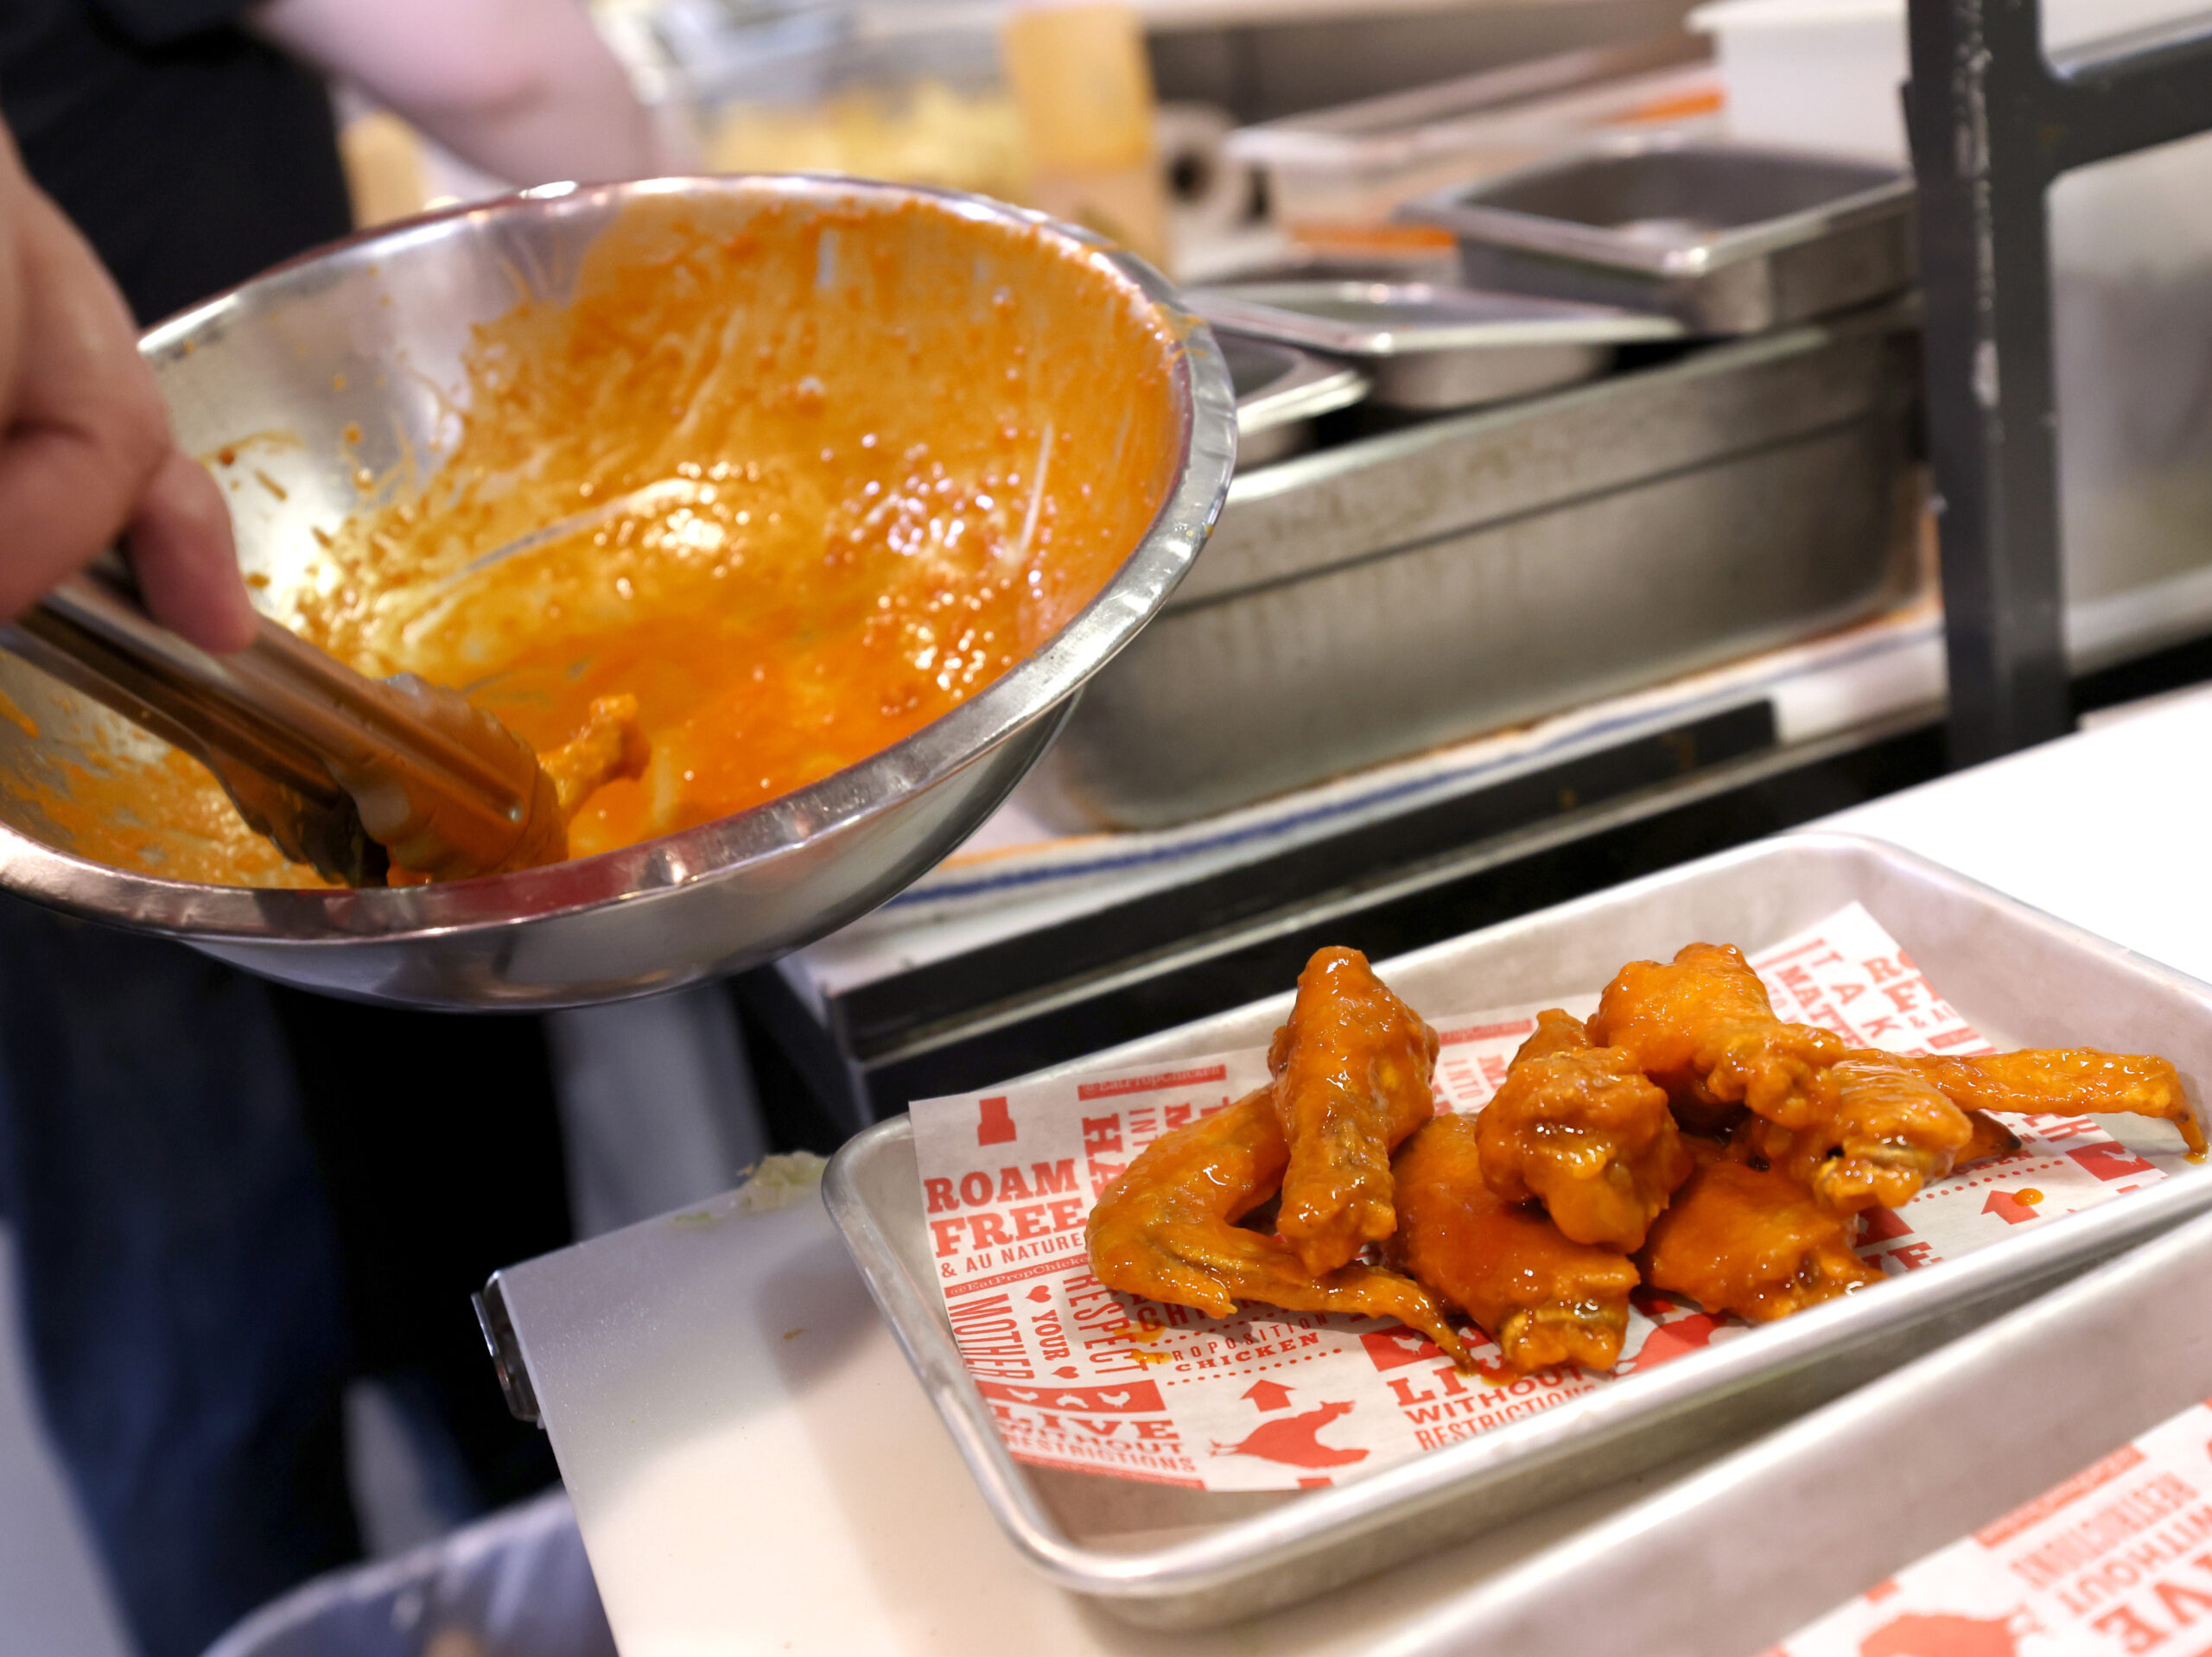 Good thing, wings cost less and beer’s flat: Super Bowl fans are expected to splurge